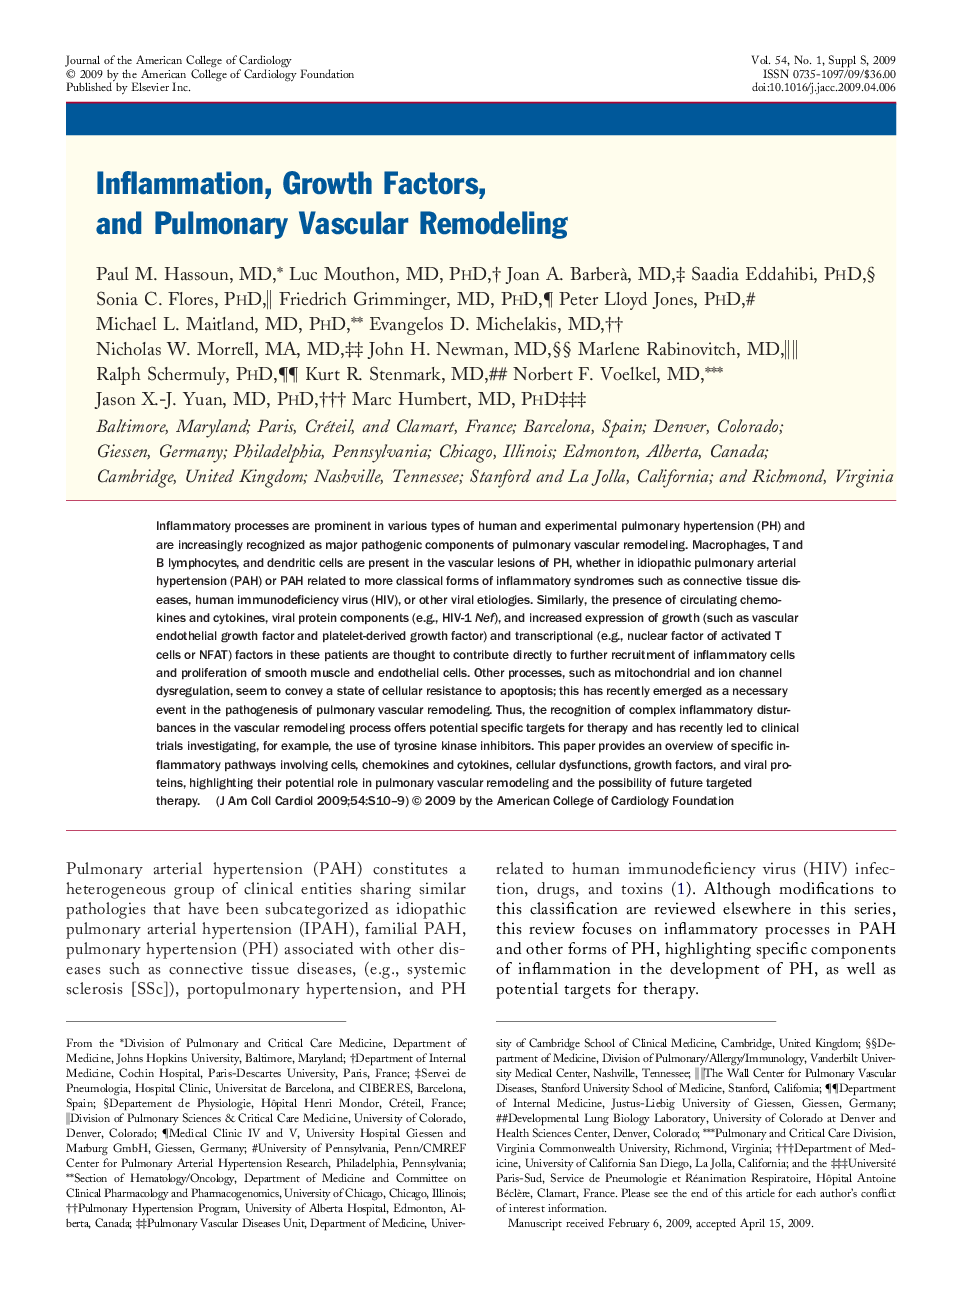 Inflammation, Growth Factors, and Pulmonary Vascular Remodeling 